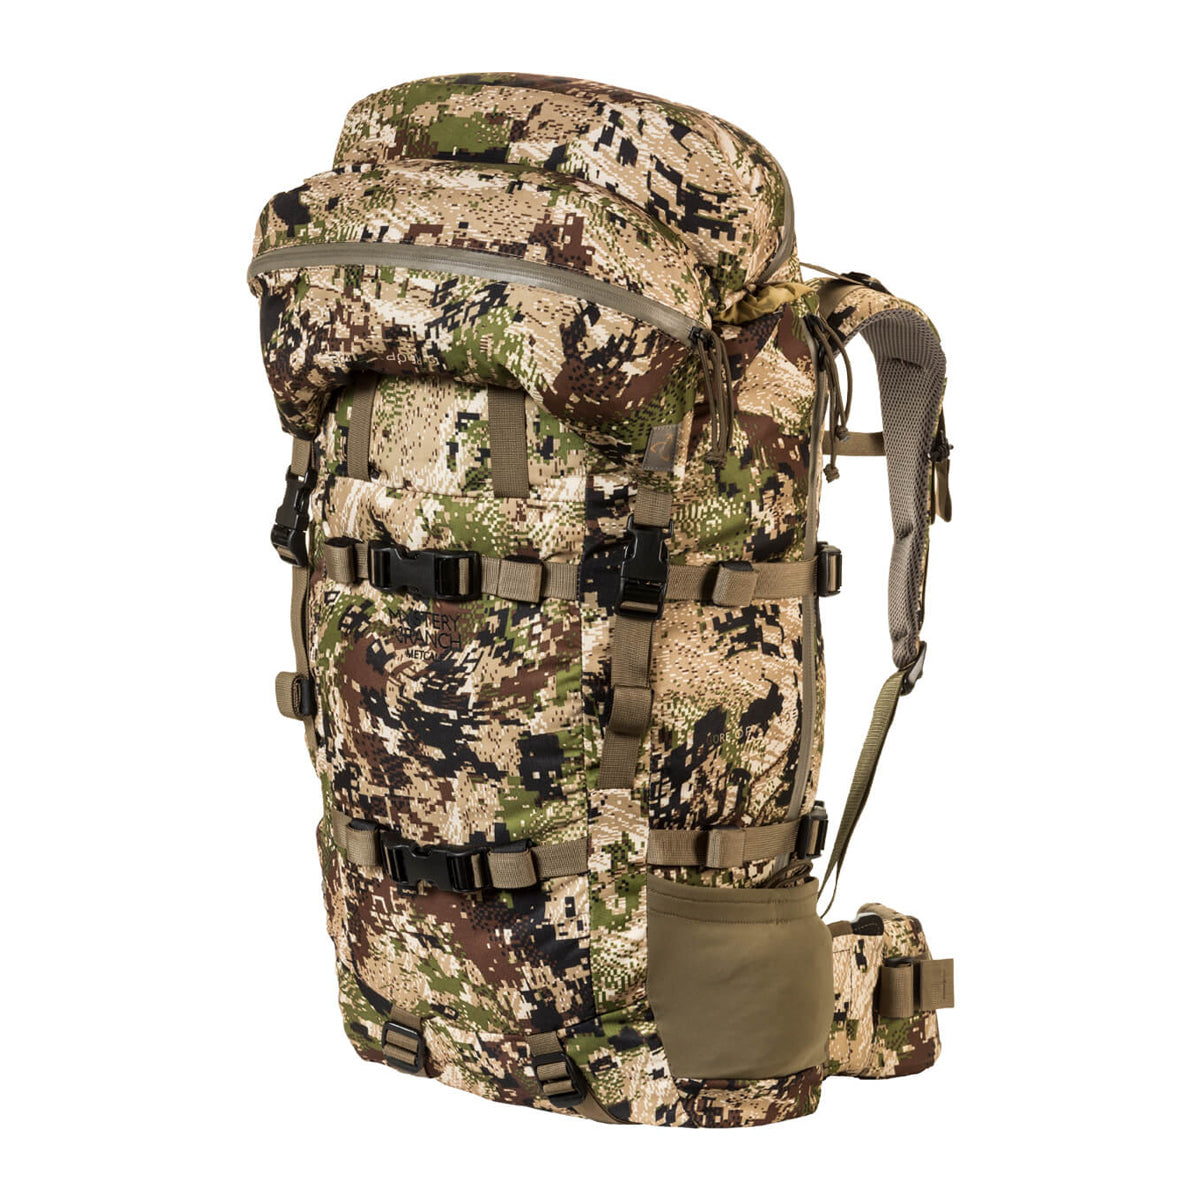 Mystery Ranch Women's Metcalf Backpack (2019) in Mystery Ranch Women's Metcalf Backpack (2019) by Mystery Ranch | Gear - goHUNT Shop by GOHUNT | Mystery Ranch - GOHUNT Shop